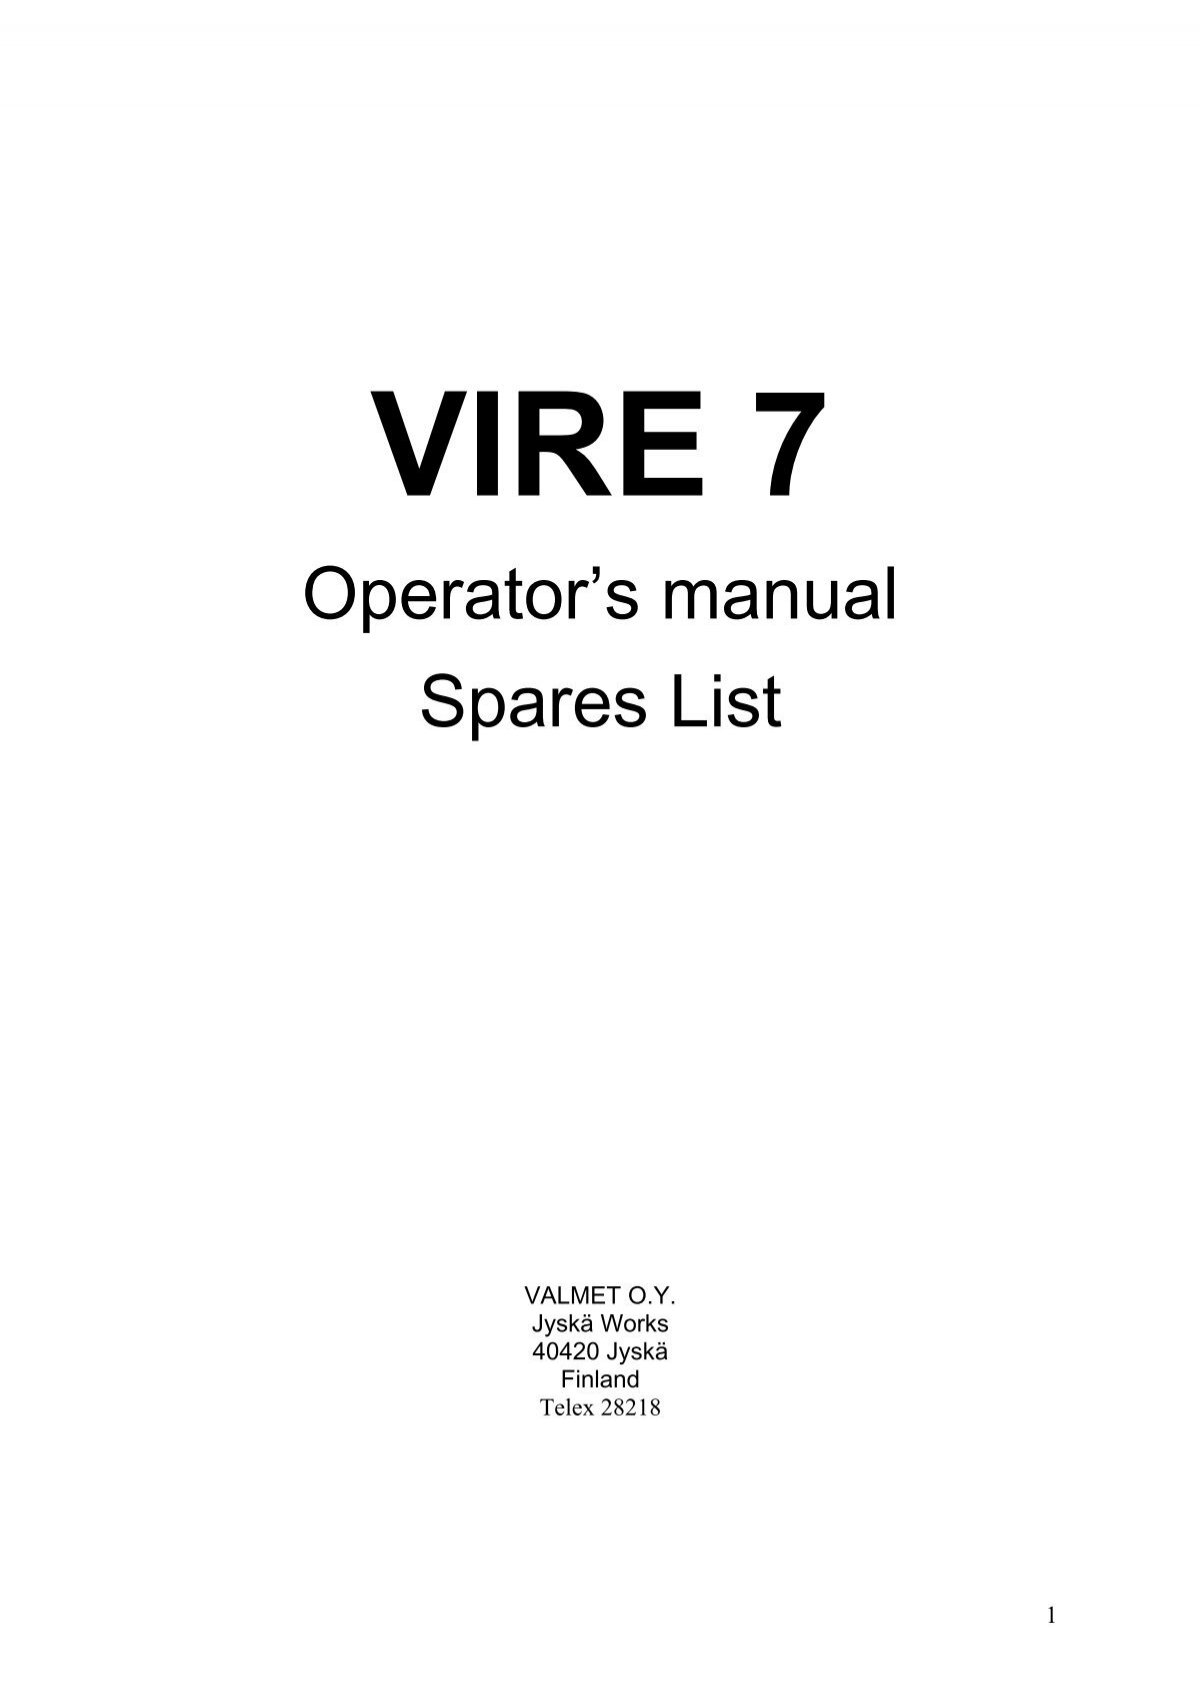 1975 European 7 Operator's Manual and Parts Lists